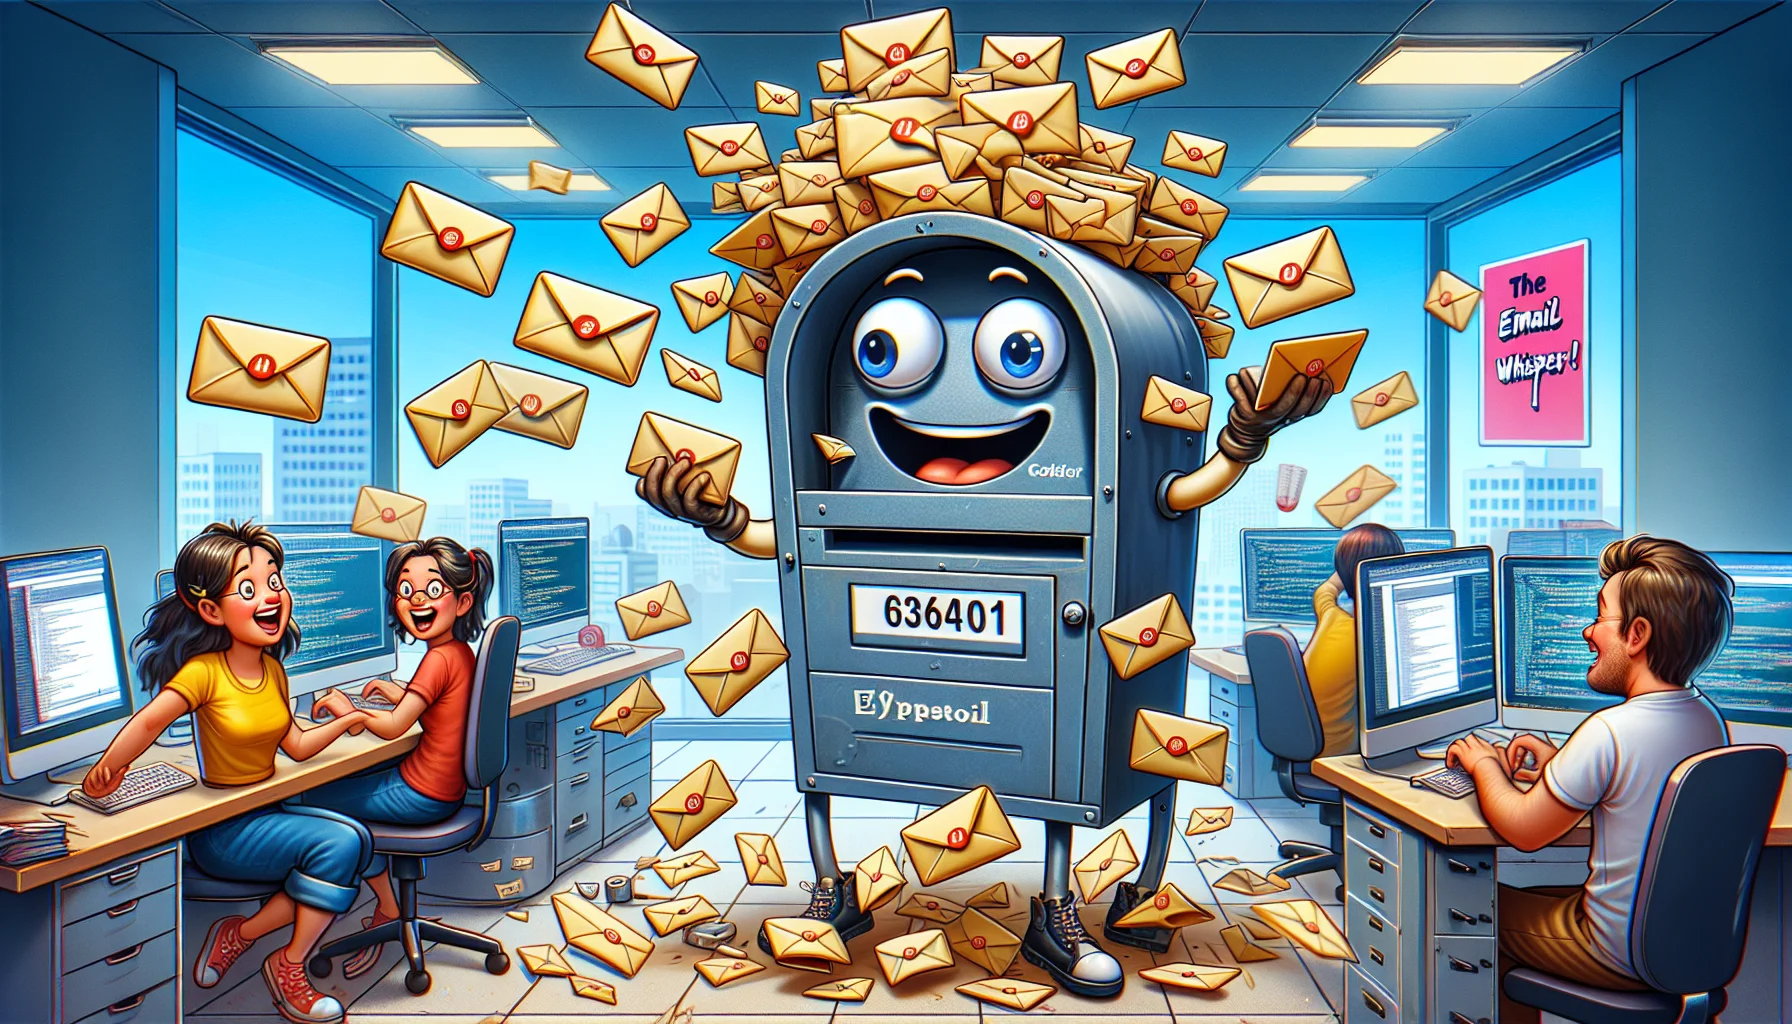 Create a humorous and engaging image encapsulating the spirit of email hosting in the world of web development. Picture a cartoon-style scene set in a buzzing office space. A mailbox as the main character, with eyes and a broad smile, effortlessly juggling multiple envelopes, each marked with '@' symbols. To the side, a Caucasian female coder chuckles at the spectacle while engrossed in her multiple computer screens, code snippets floating around. Poster on the wall humorously exclaiming 'The Email Whisperer!' adds a subtext to the light-hearted chaos unfolding.